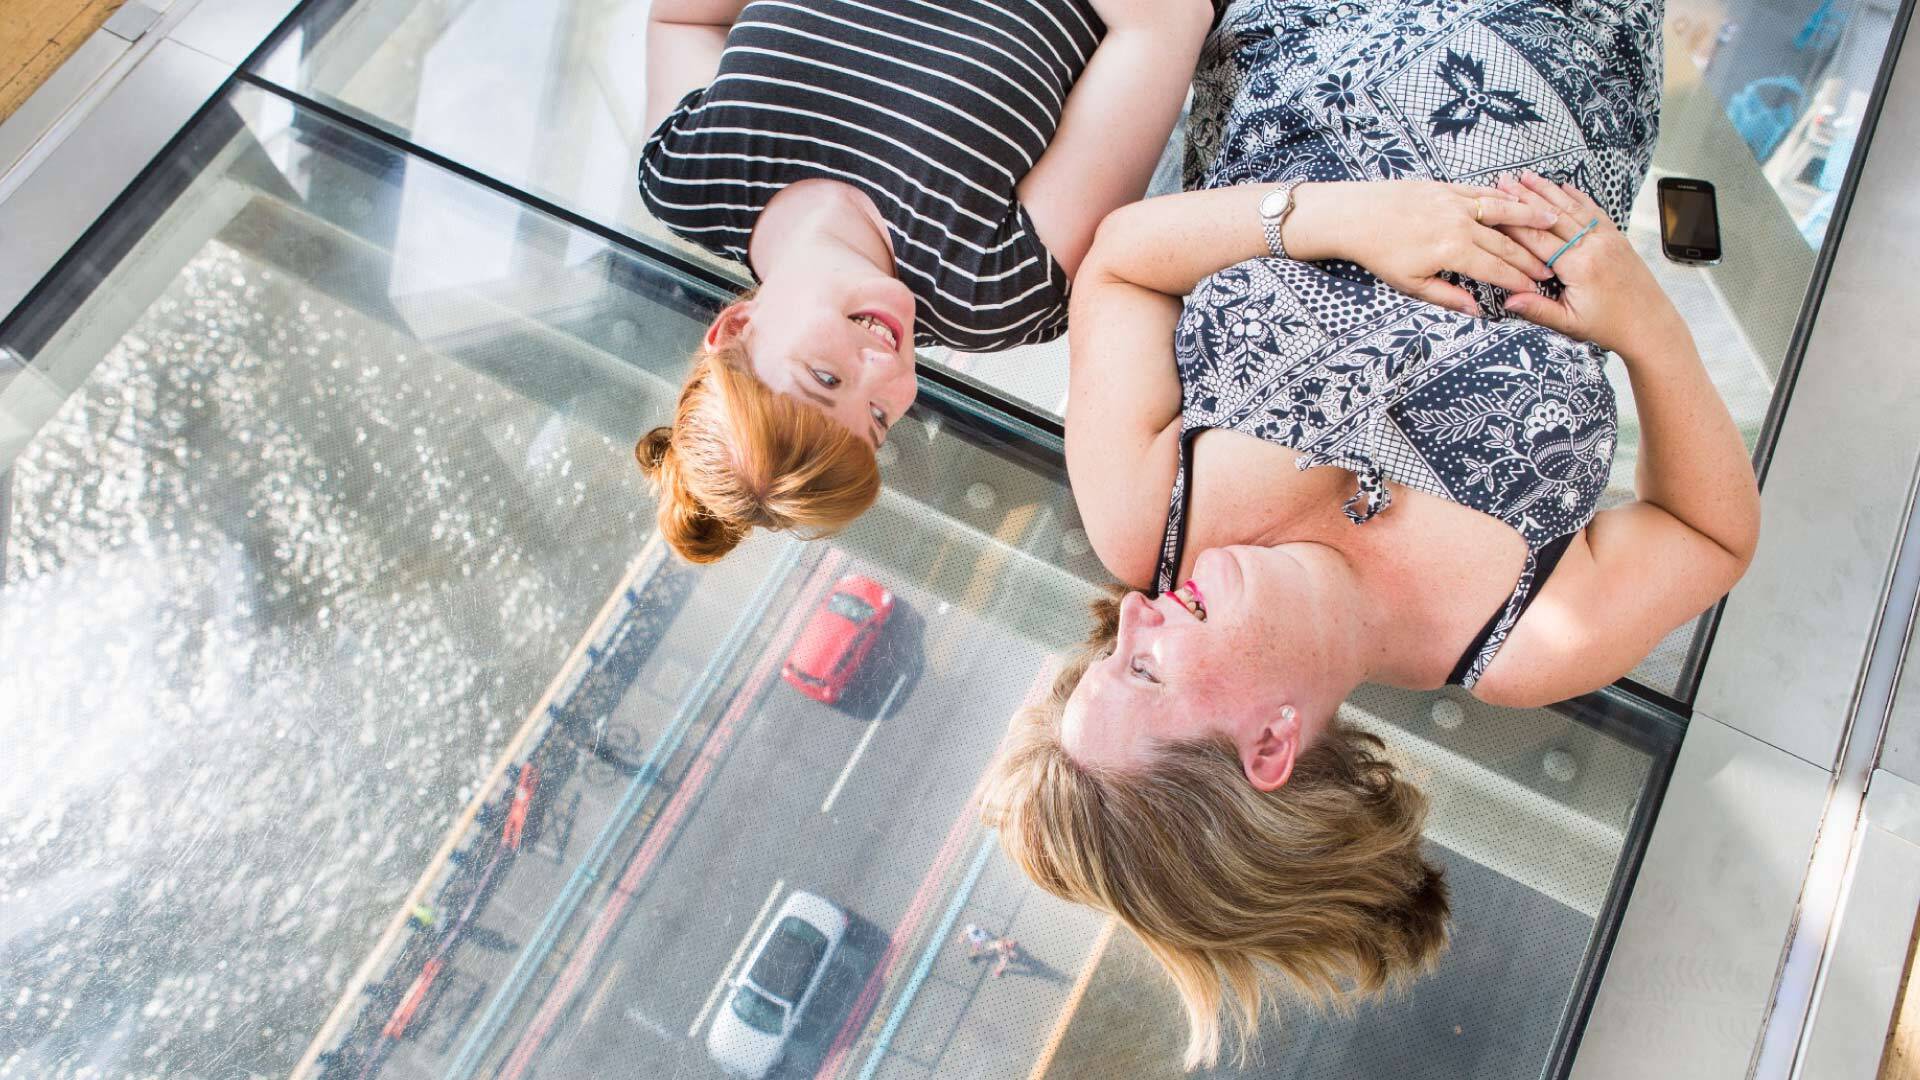 8 best Instagrammable places in London - Glass Floor Tower Bridge - two people lying on glass floor with a view of the Thames below